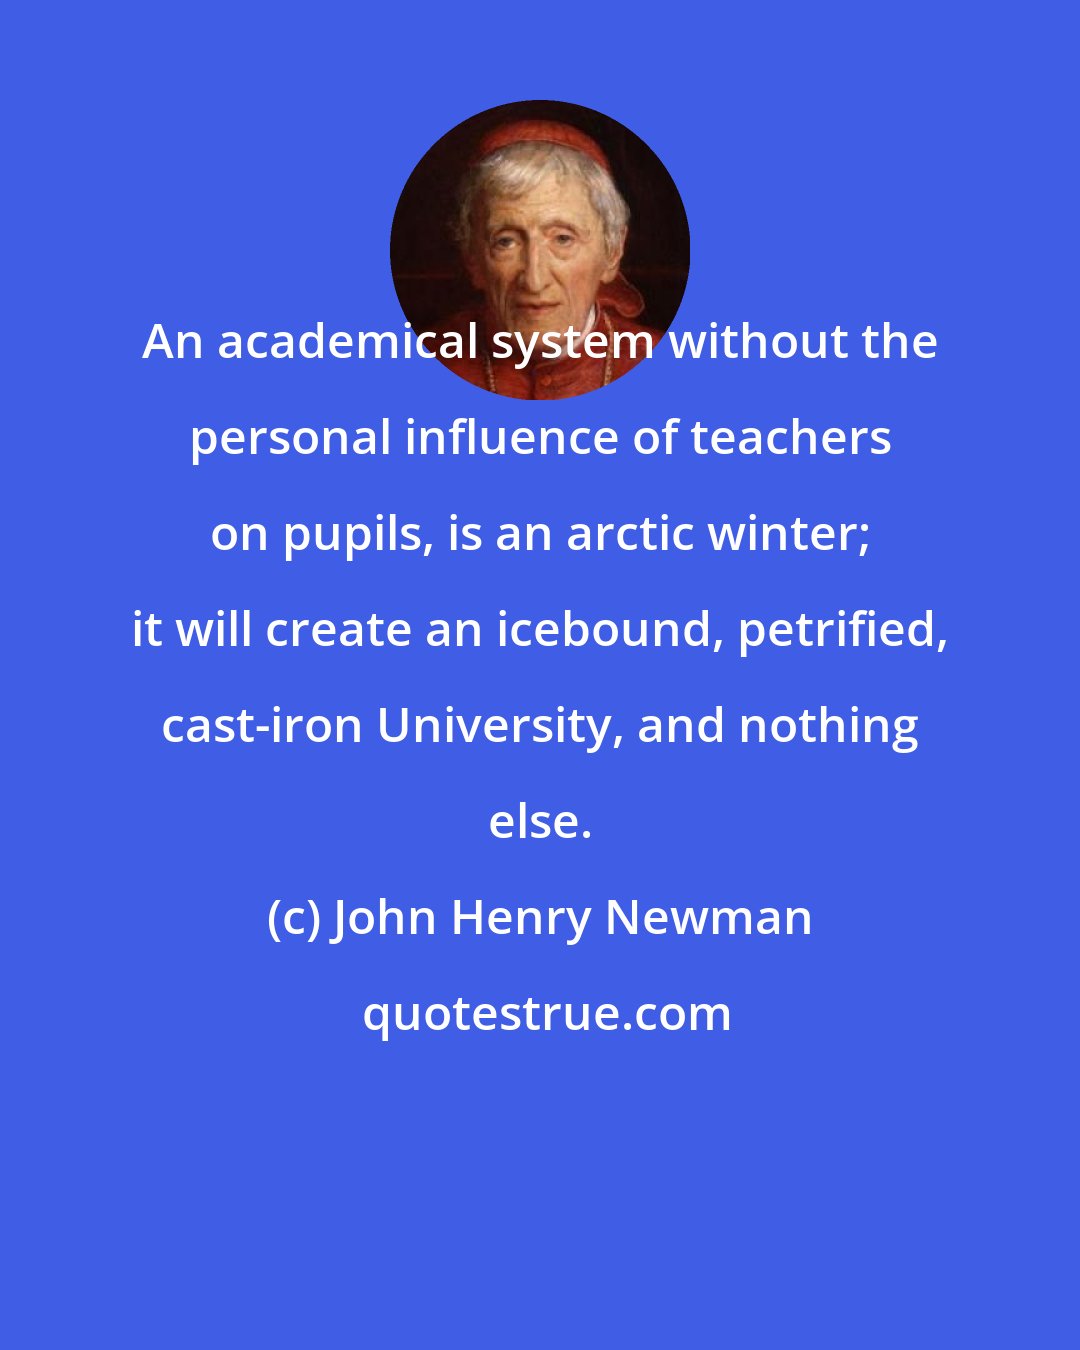 John Henry Newman: An academical system without the personal influence of teachers on pupils, is an arctic winter; it will create an icebound, petrified, cast-iron University, and nothing else.